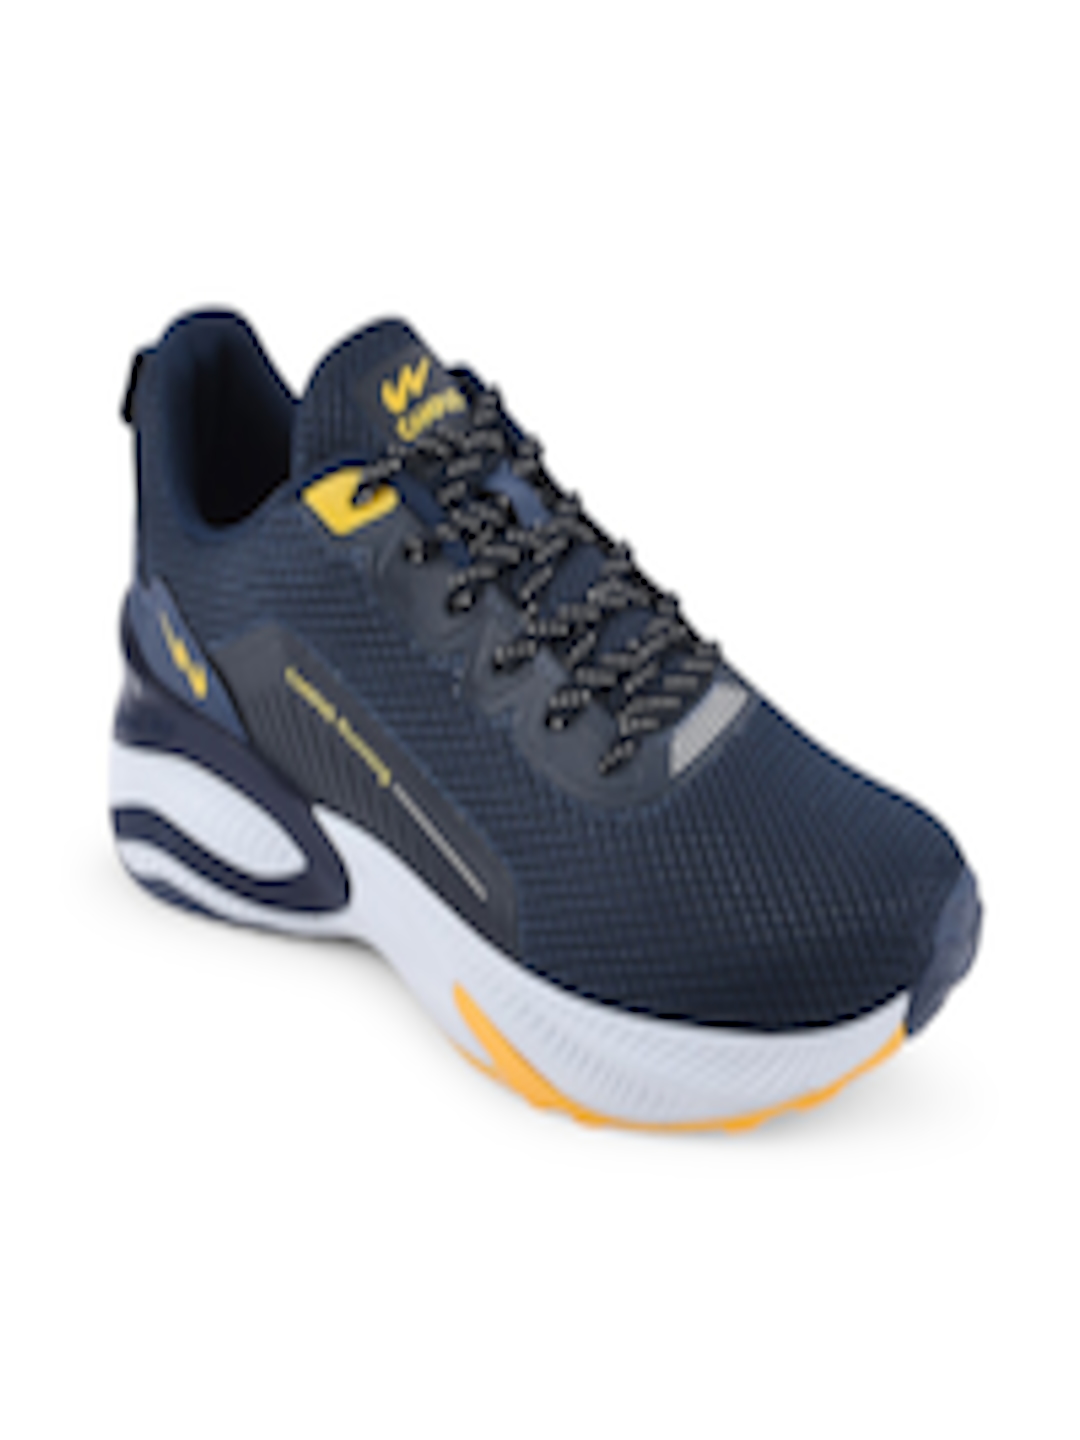 Buy Campus Men Navy Blue Mesh Running Non Marking Shoes - Sports Shoes ...